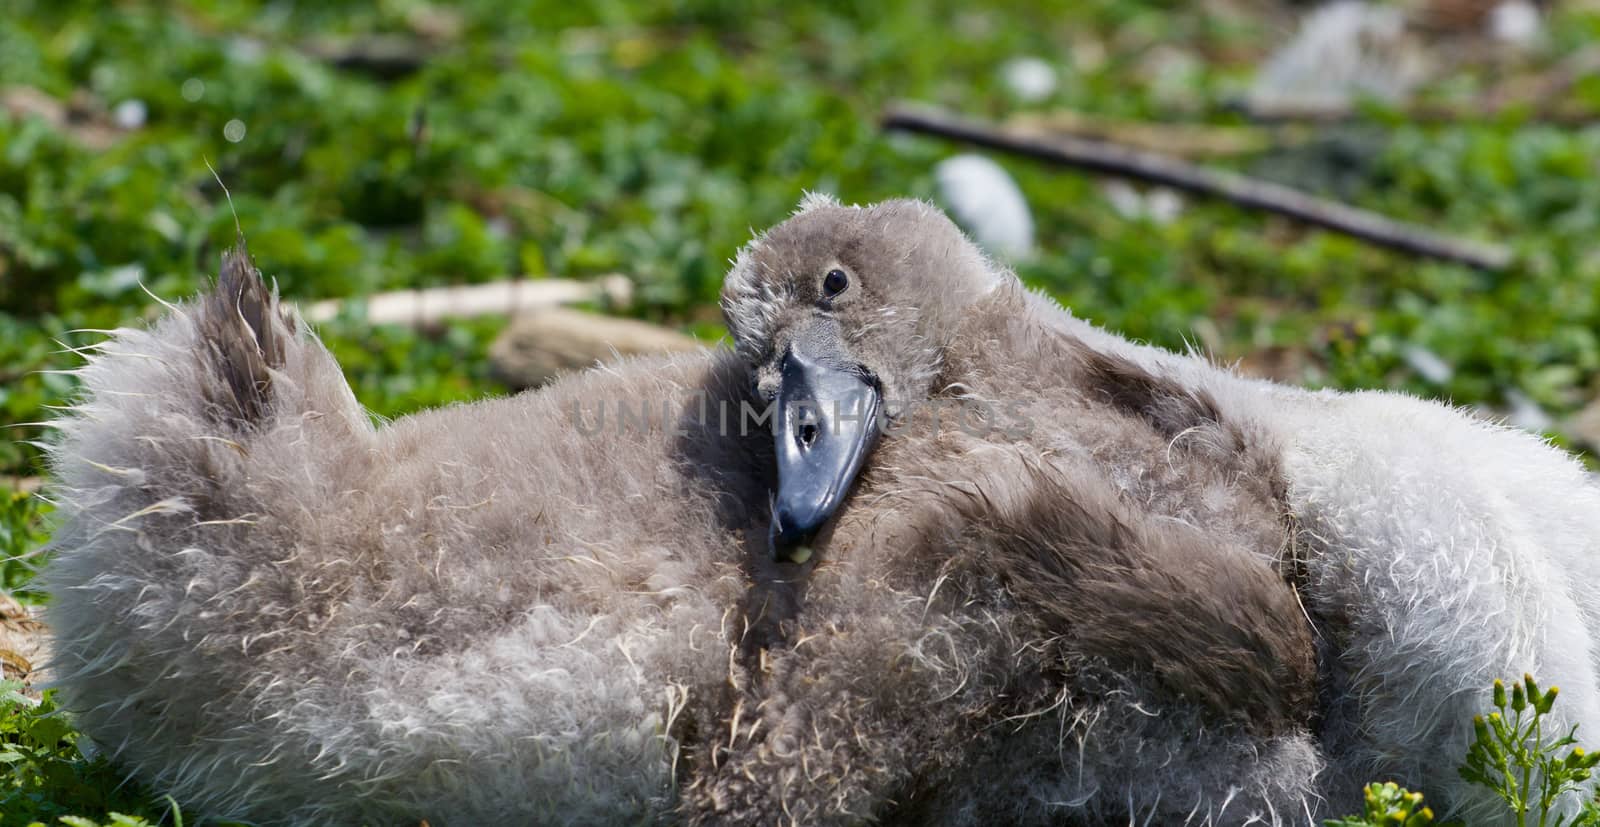 The young mute swan is going to sleep